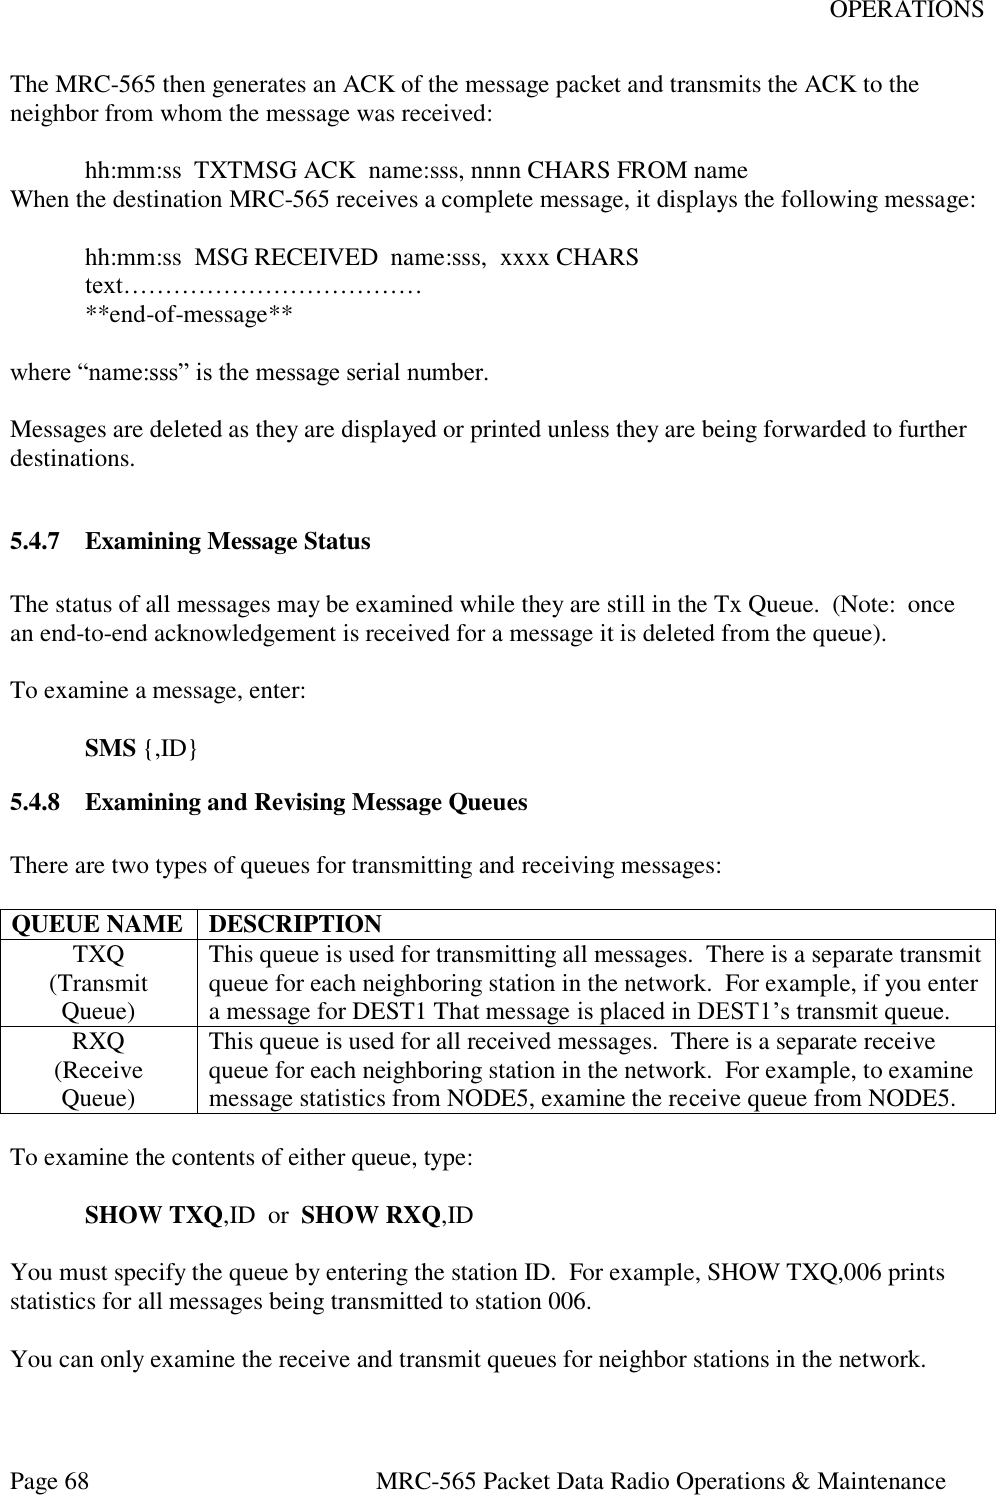 OPERATIONS Page 68  MRC-565 Packet Data Radio Operations &amp; Maintenance The MRC-565 then generates an ACK of the message packet and transmits the ACK to the neighbor from whom the message was received:    hh:mm:ss  TXTMSG ACK  name:sss, nnnn CHARS FROM name When the destination MRC-565 receives a complete message, it displays the following message:    hh:mm:ss  MSG RECEIVED  name:sss,  xxxx CHARS  text………………………………   **end-of-message**  where “name:sss” is the message serial number.  Messages are deleted as they are displayed or printed unless they are being forwarded to further destinations.  5.4.7 Examining Message Status  The status of all messages may be examined while they are still in the Tx Queue.  (Note:  once an end-to-end acknowledgement is received for a message it is deleted from the queue).  To examine a message, enter:   SMS {,ID} 5.4.8 Examining and Revising Message Queues  There are two types of queues for transmitting and receiving messages:  QUEUE NAME DESCRIPTION TXQ (Transmit Queue) This queue is used for transmitting all messages.  There is a separate transmit queue for each neighboring station in the network.  For example, if you enter a message for DEST1 That message is placed in DEST1’s transmit queue. RXQ (Receive  Queue) This queue is used for all received messages.  There is a separate receive queue for each neighboring station in the network.  For example, to examine message statistics from NODE5, examine the receive queue from NODE5.  To examine the contents of either queue, type:   SHOW TXQ,ID  or  SHOW RXQ,ID  You must specify the queue by entering the station ID.  For example, SHOW TXQ,006 prints statistics for all messages being transmitted to station 006.  You can only examine the receive and transmit queues for neighbor stations in the network. 